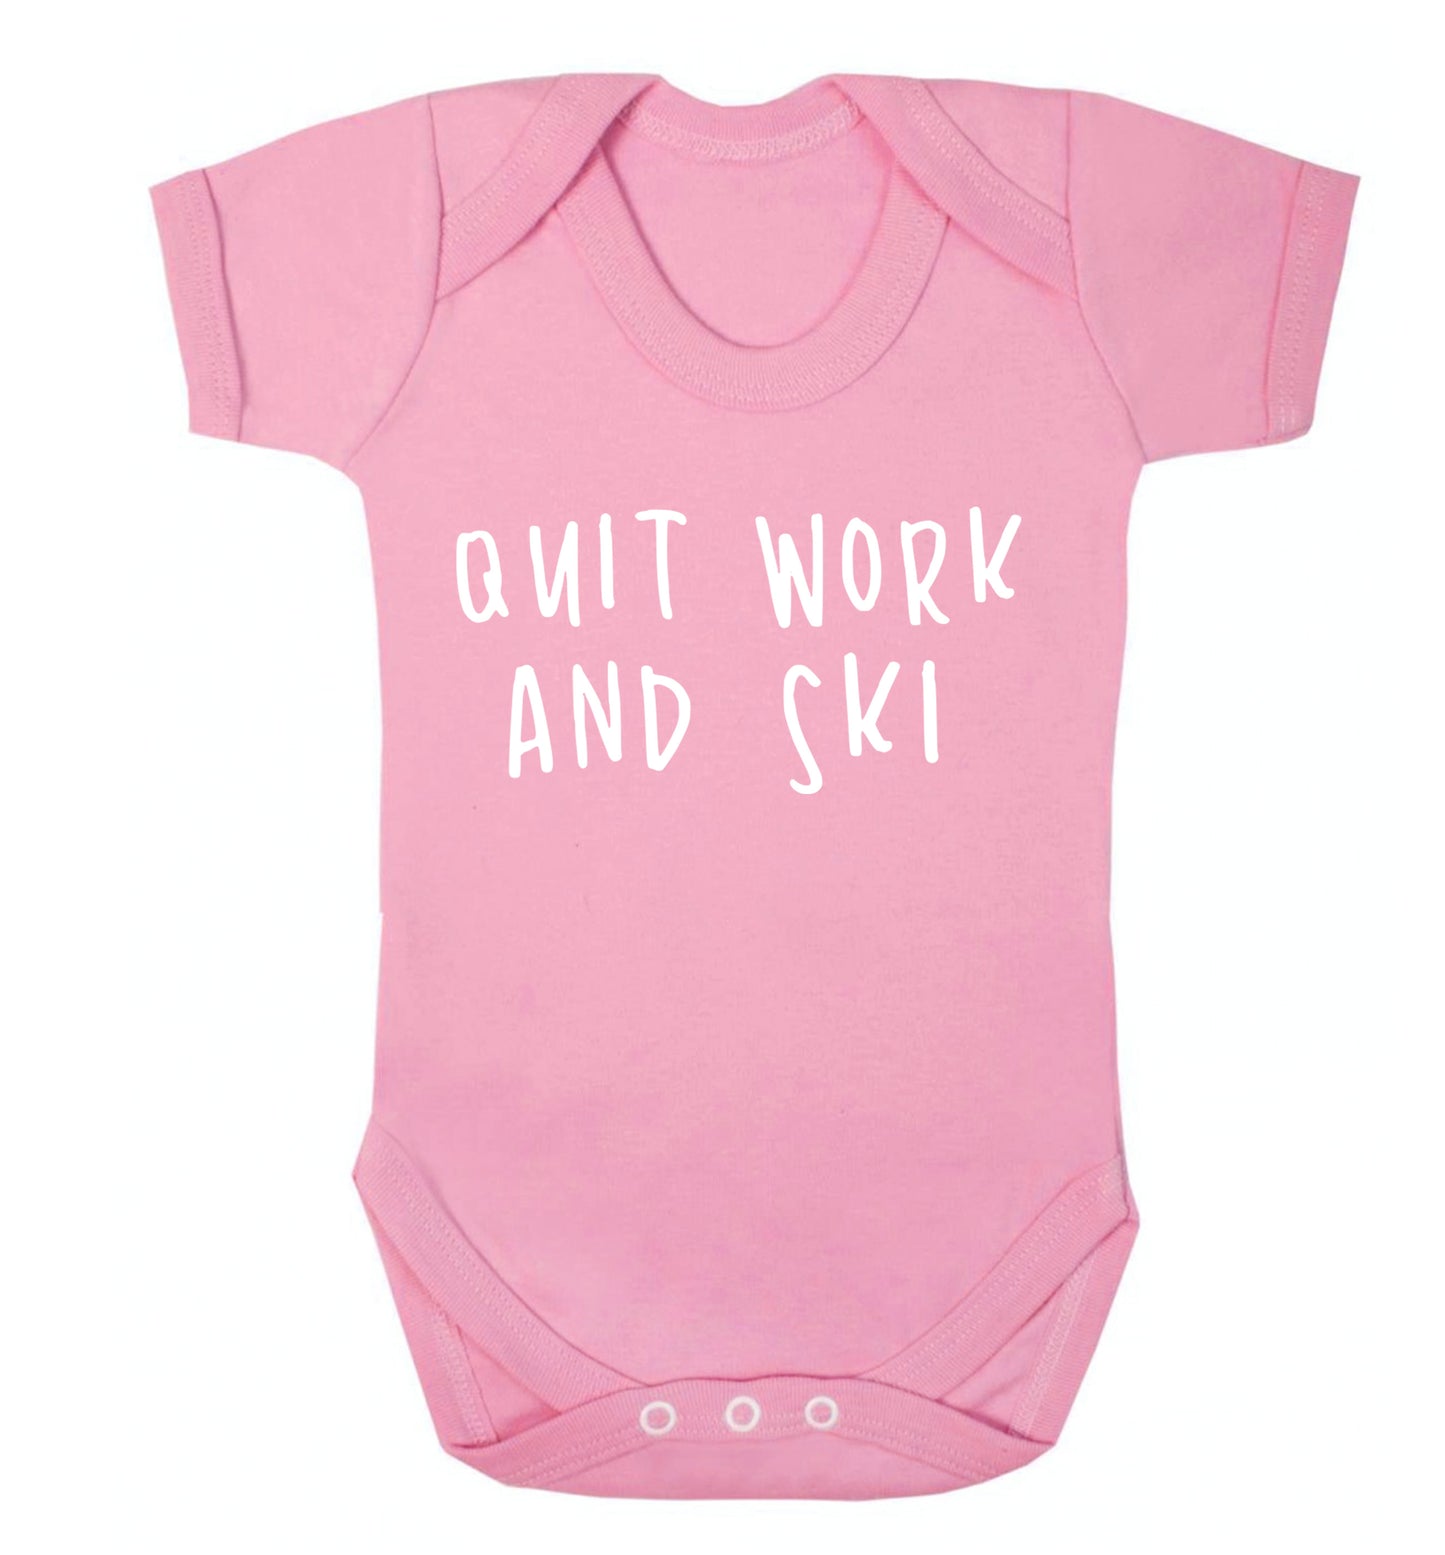 Quit work and ski Baby Vest pale pink 18-24 months